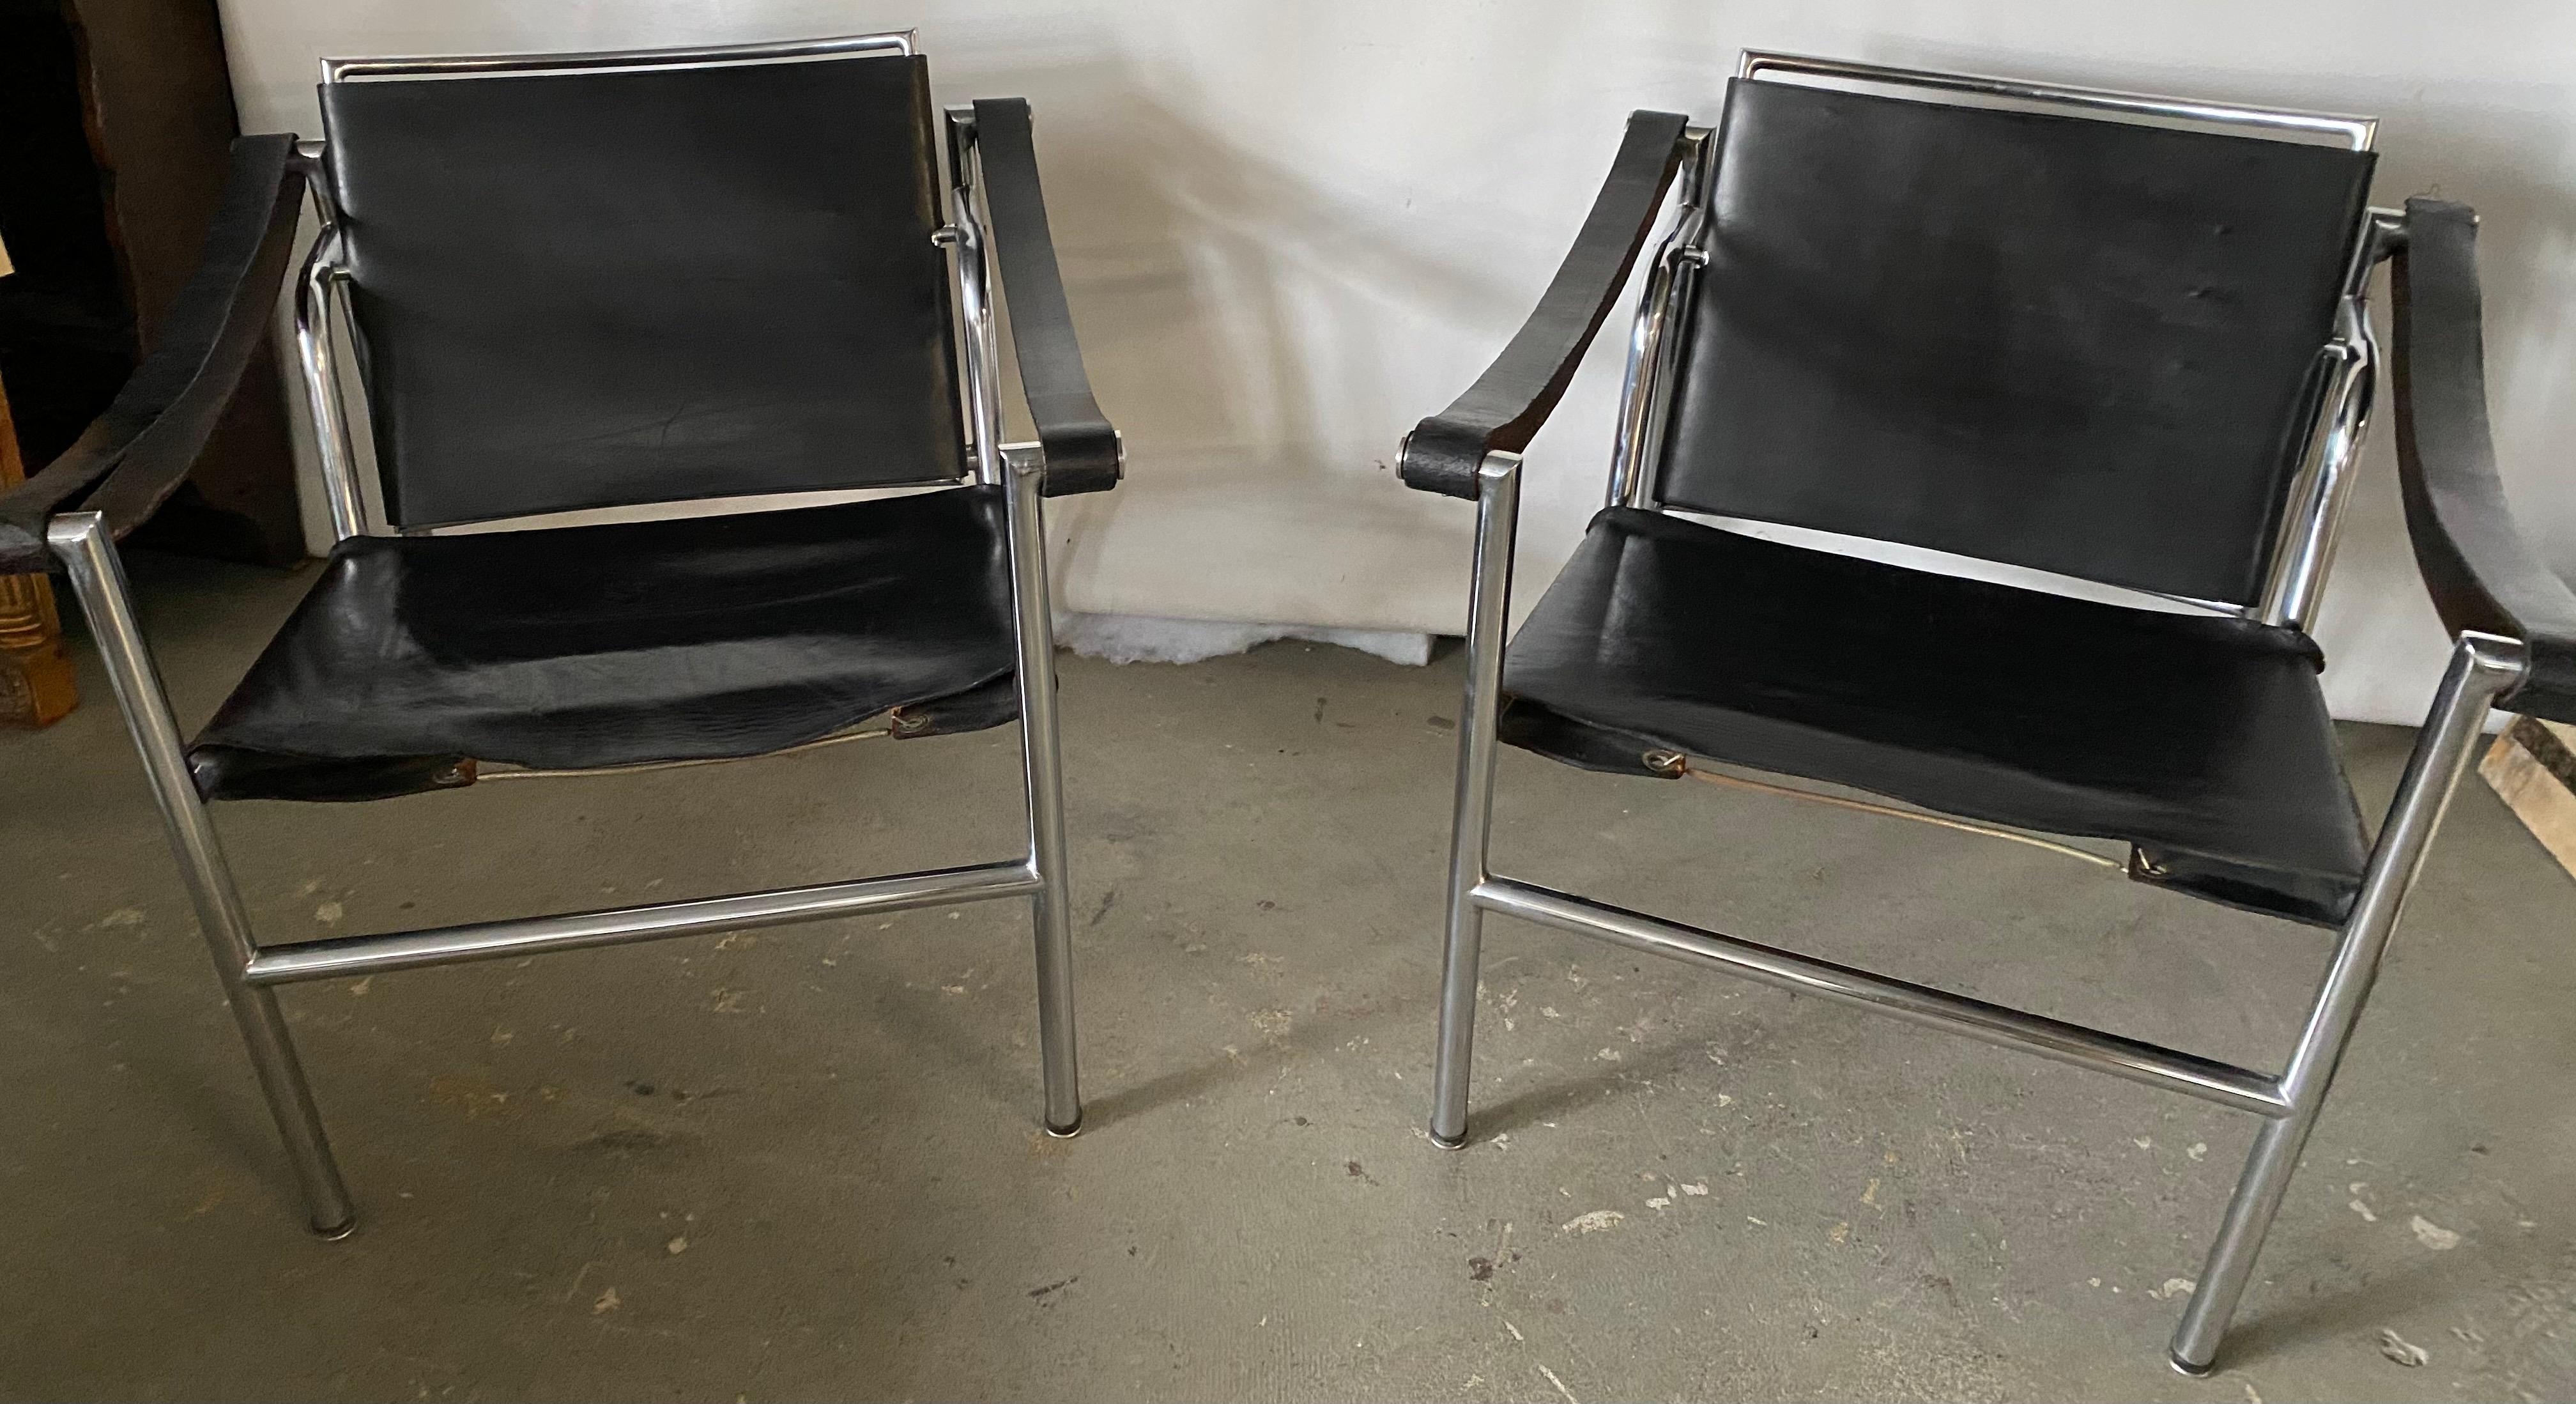 The LC1 style occasional lounging arm chairs with leather and springs straps and chrome frame are in very good condition. These are not marked but could possibly be LC1 chairs since there was a period when these chairs were manufactured but not